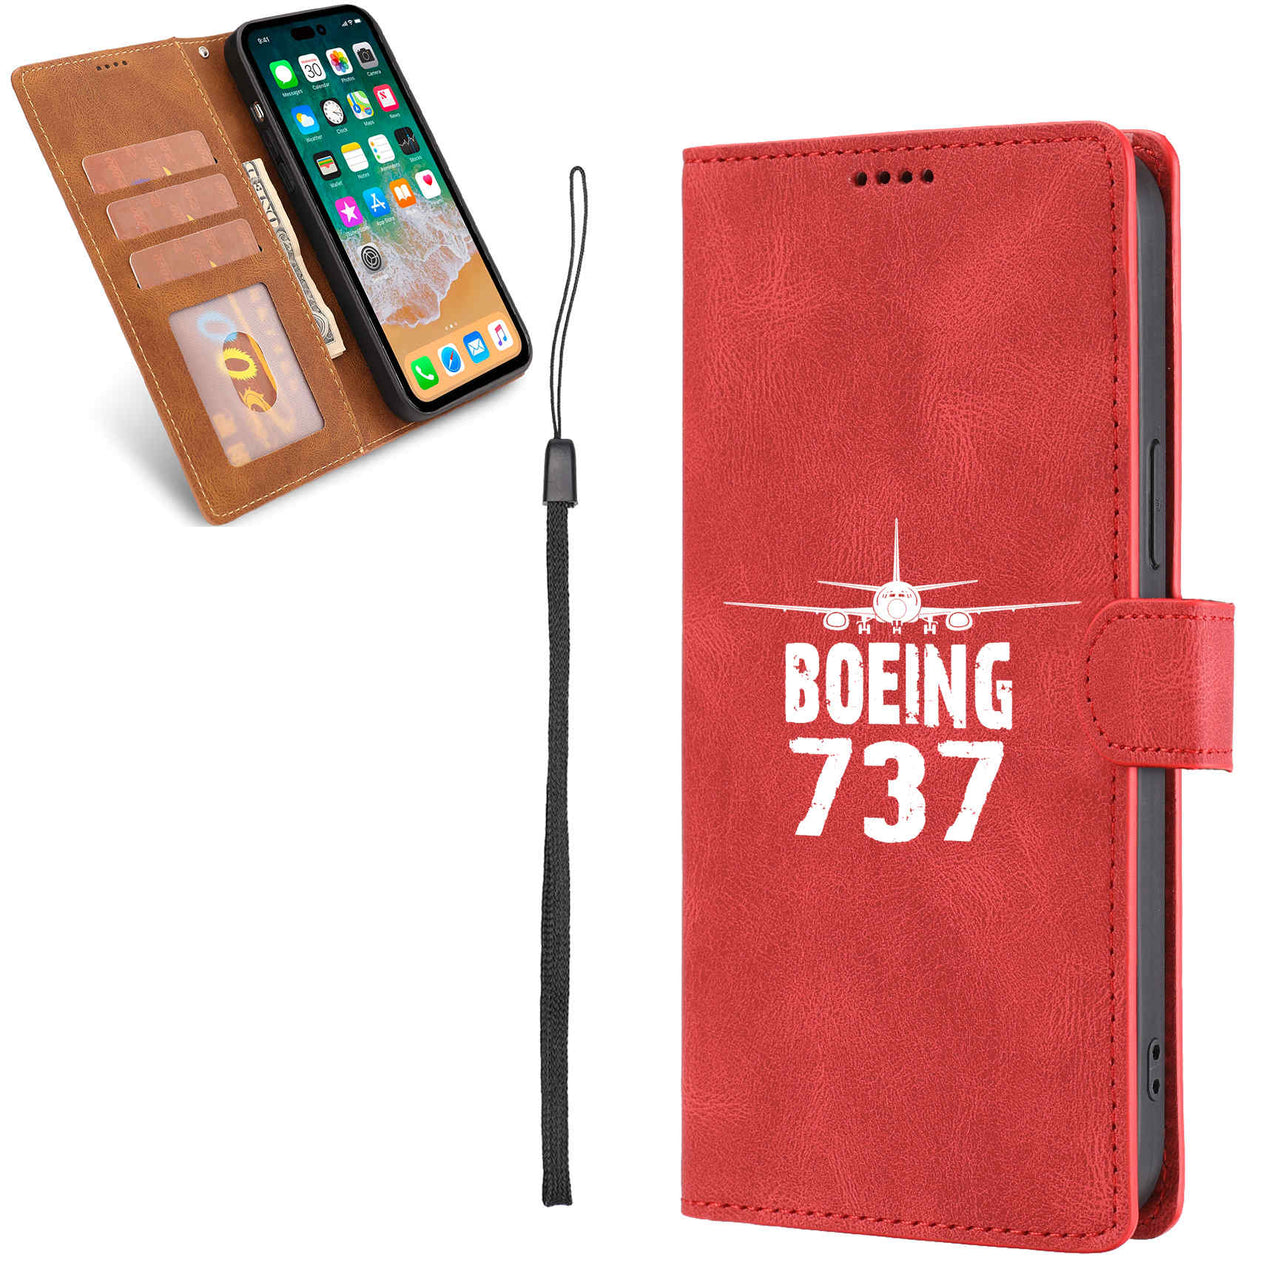 Boeing 737 & Plane Designed Leather Samsung S & Note Cases